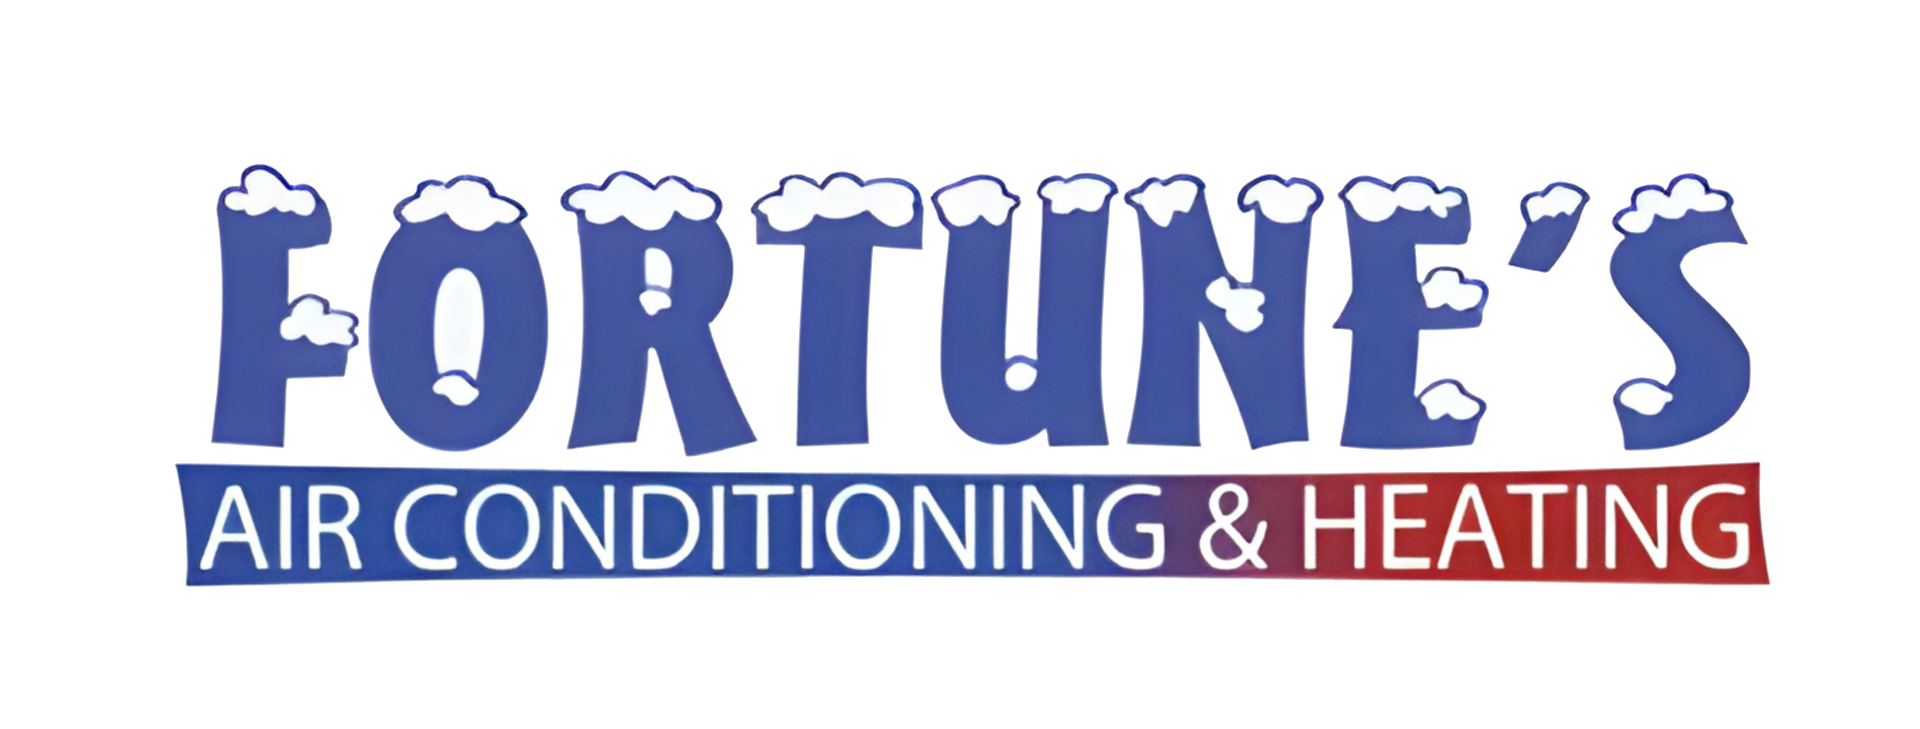 the logo for fortune 's air conditioning and heating